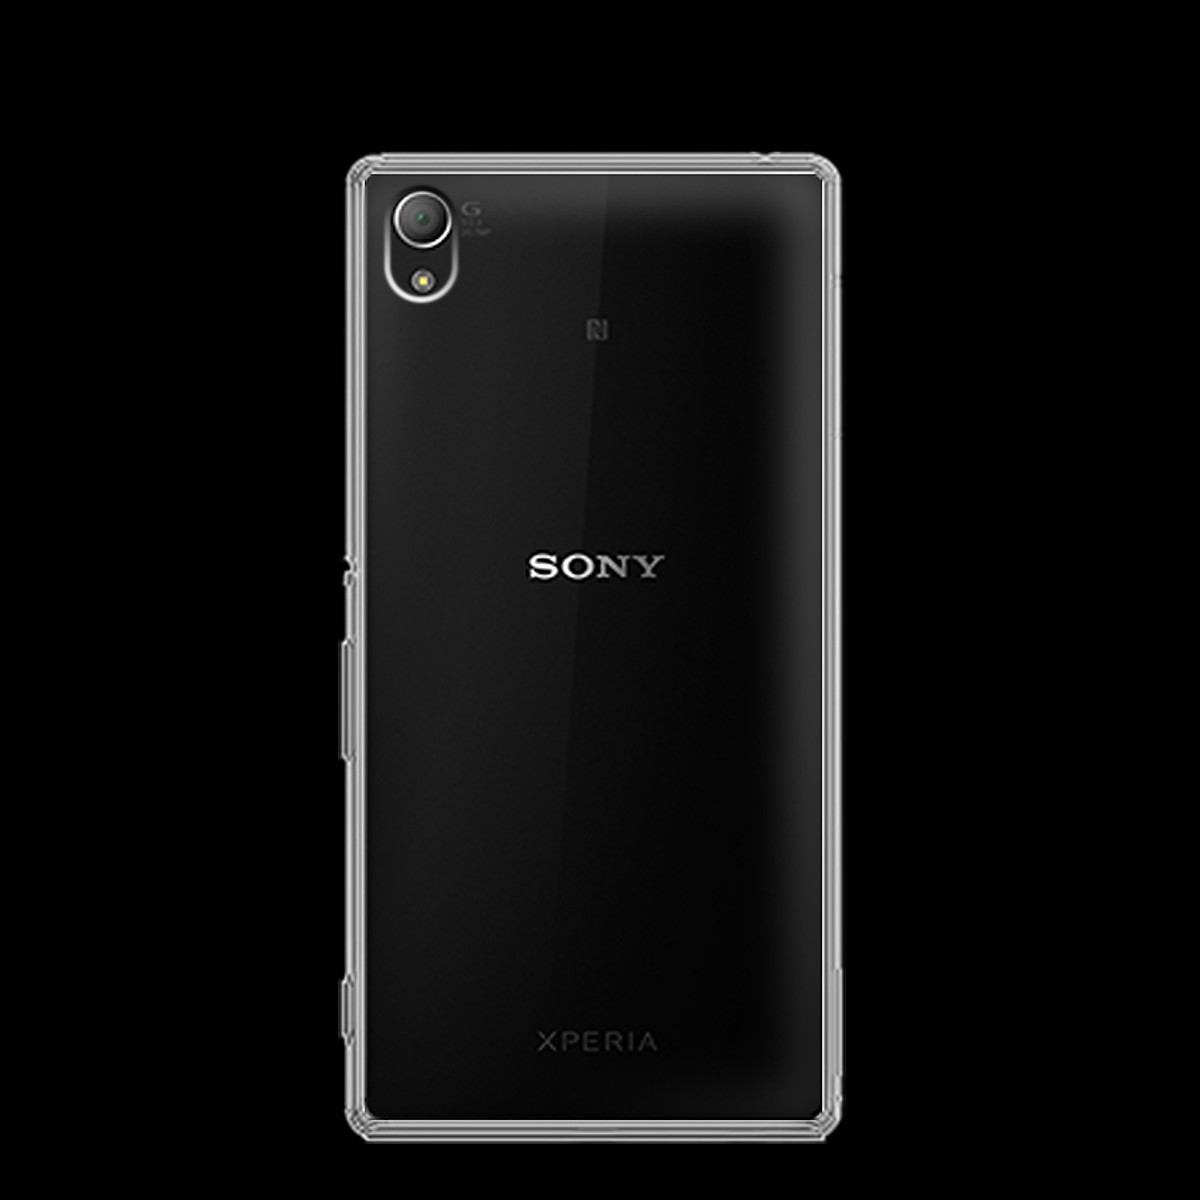 Ốp lưng silicon dẻo trong suốt loại A cao cấp cho Sony Xperia Z4